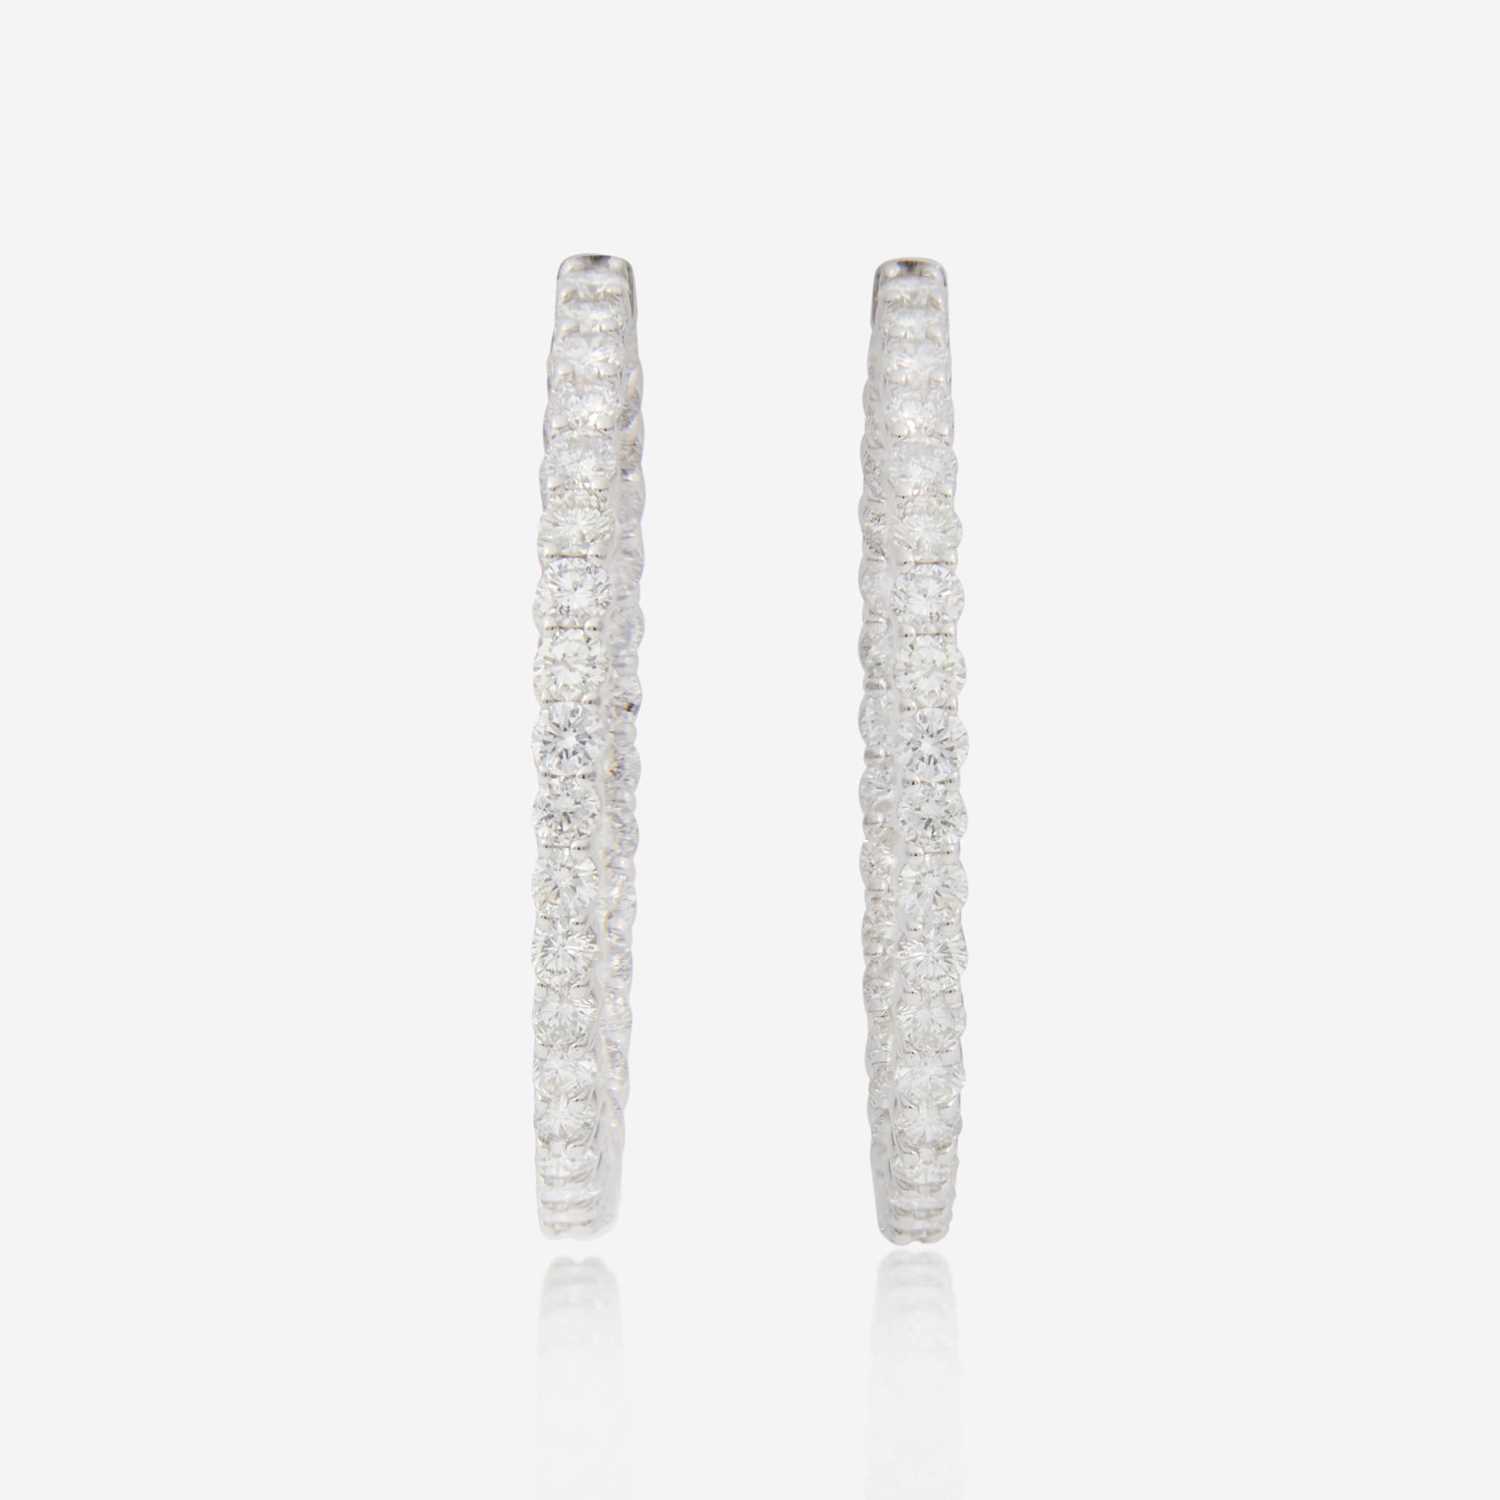 Lot 80 - A Pair of Diamond and 14K White Gold Earrings